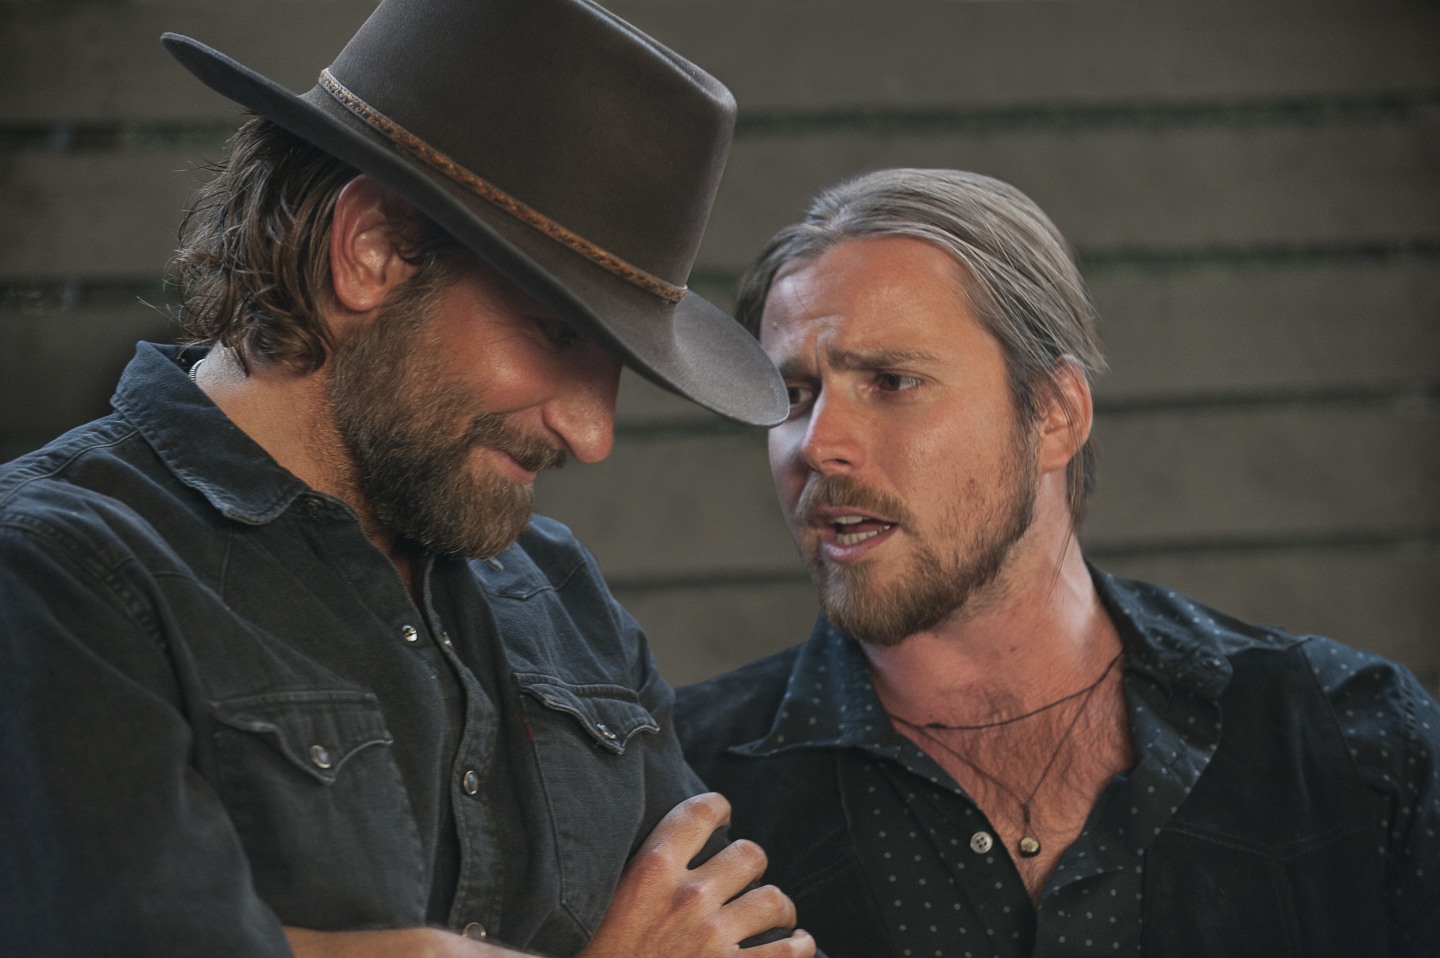 You can thank Lukas Nelson for the incredible <i>A Star Is Born</i> soundtrack